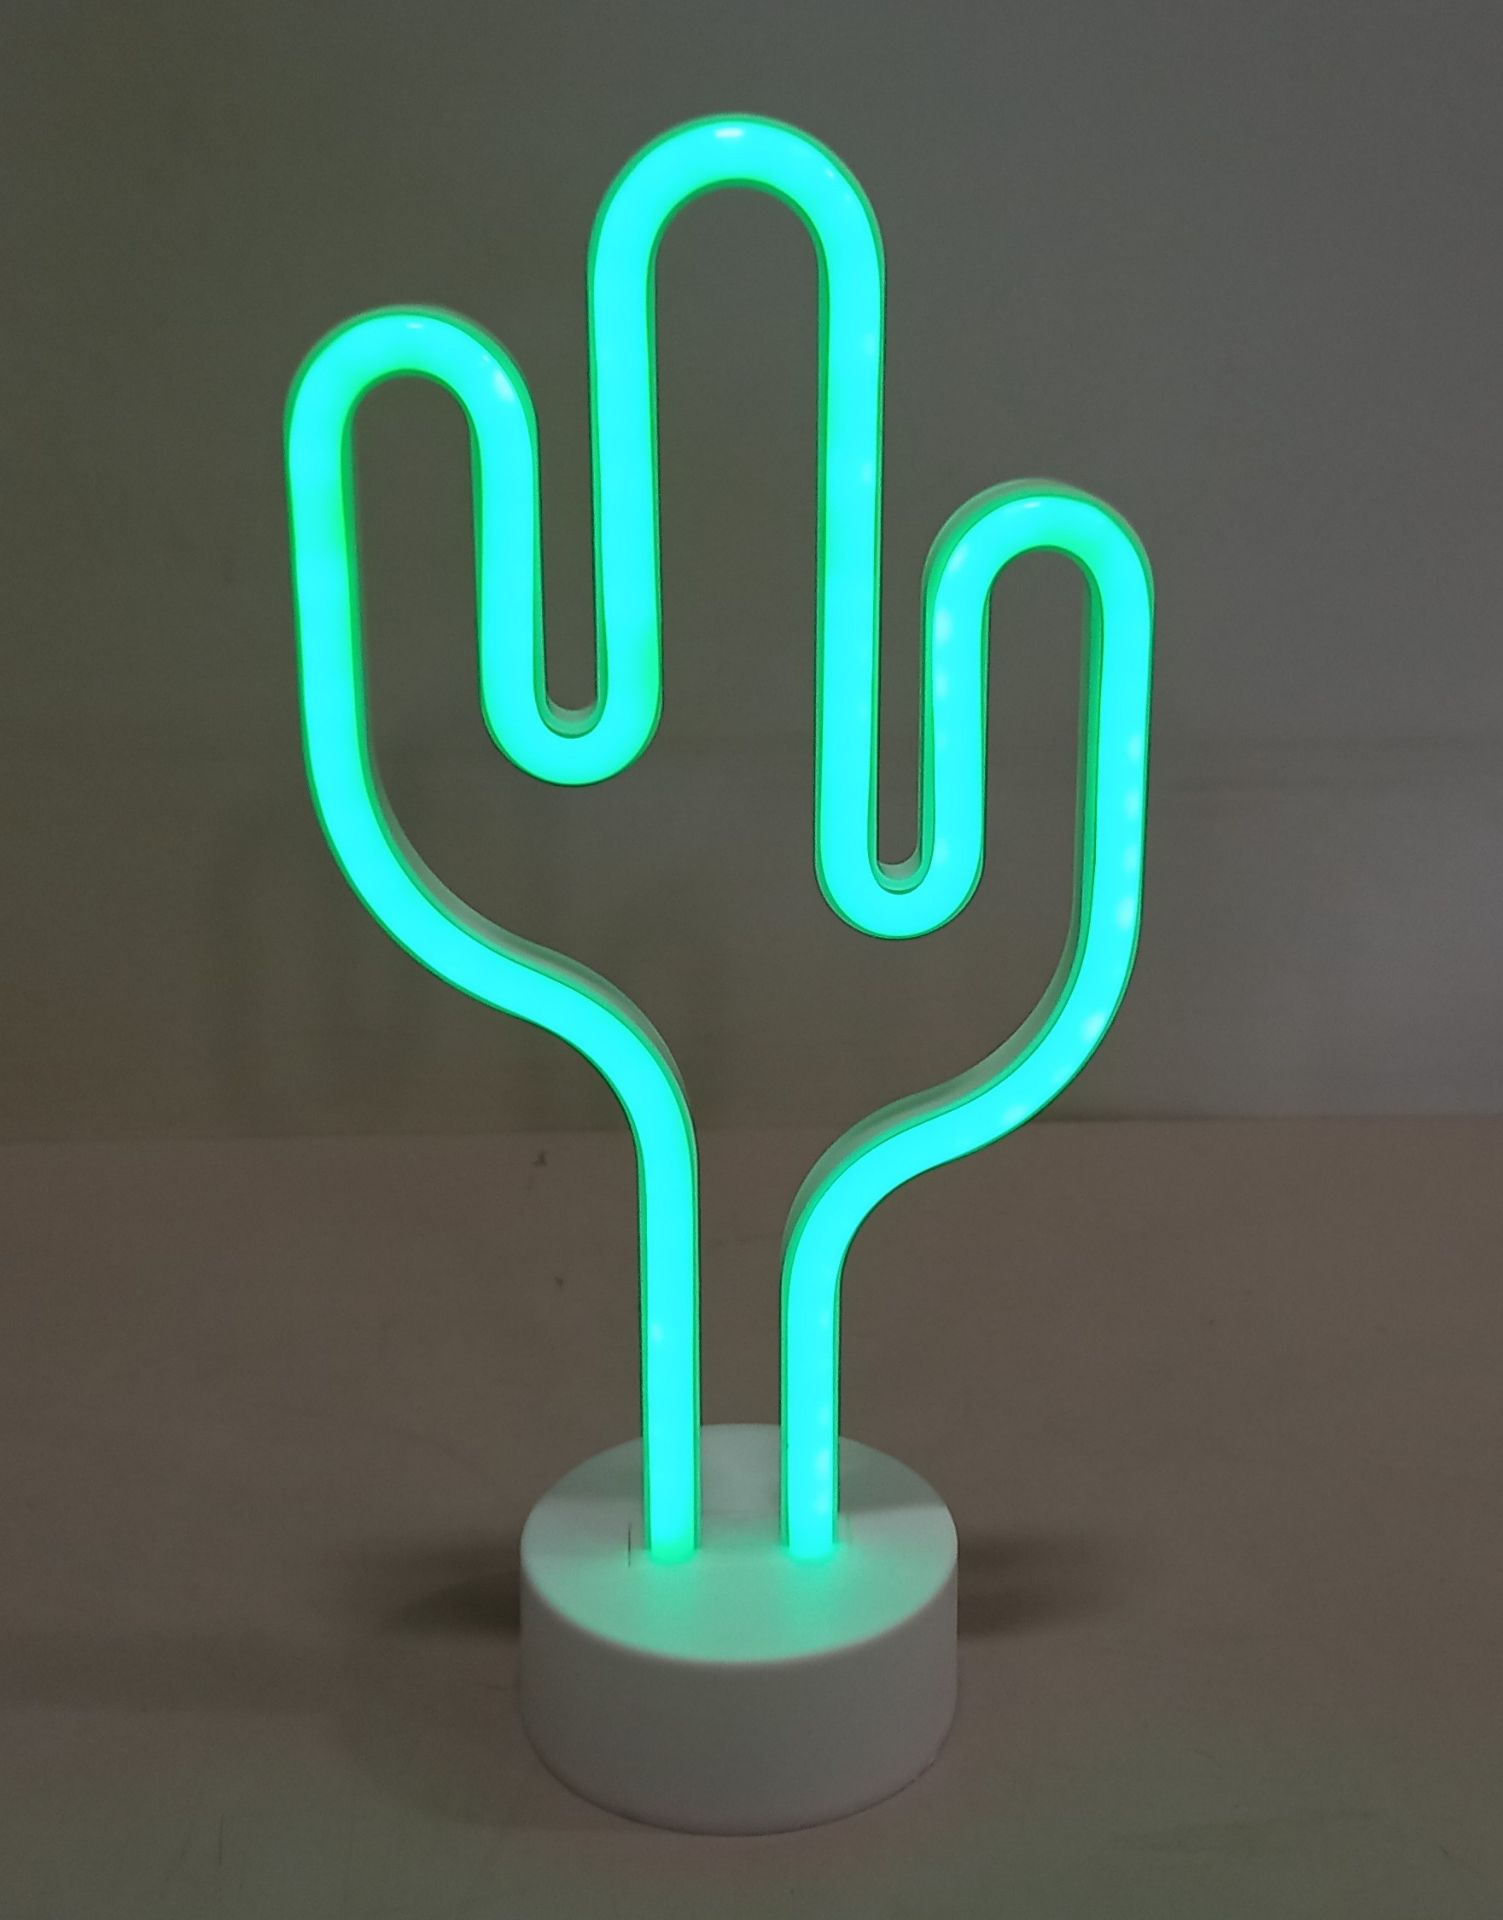 20 X BRAND NEW CACTUS NEON NIGHTLIGHTS - IN 1 OUTER BOX - RRP £12 (EBAY) / £15 (AMAZON) - REQUIRES 3